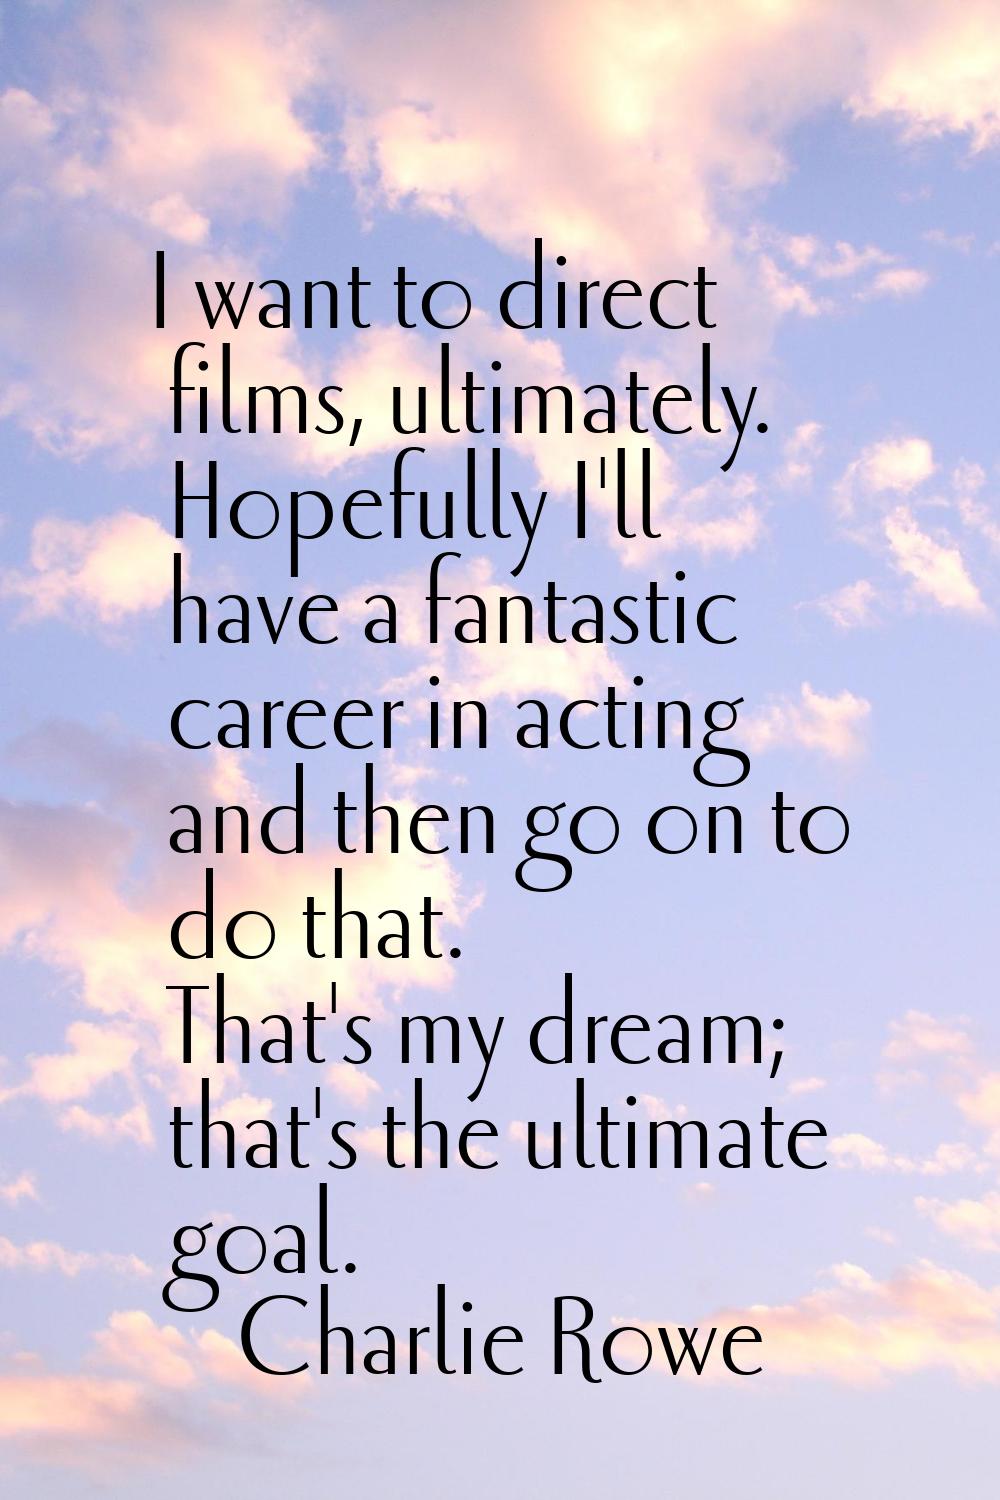 I want to direct films, ultimately. Hopefully I'll have a fantastic career in acting and then go on